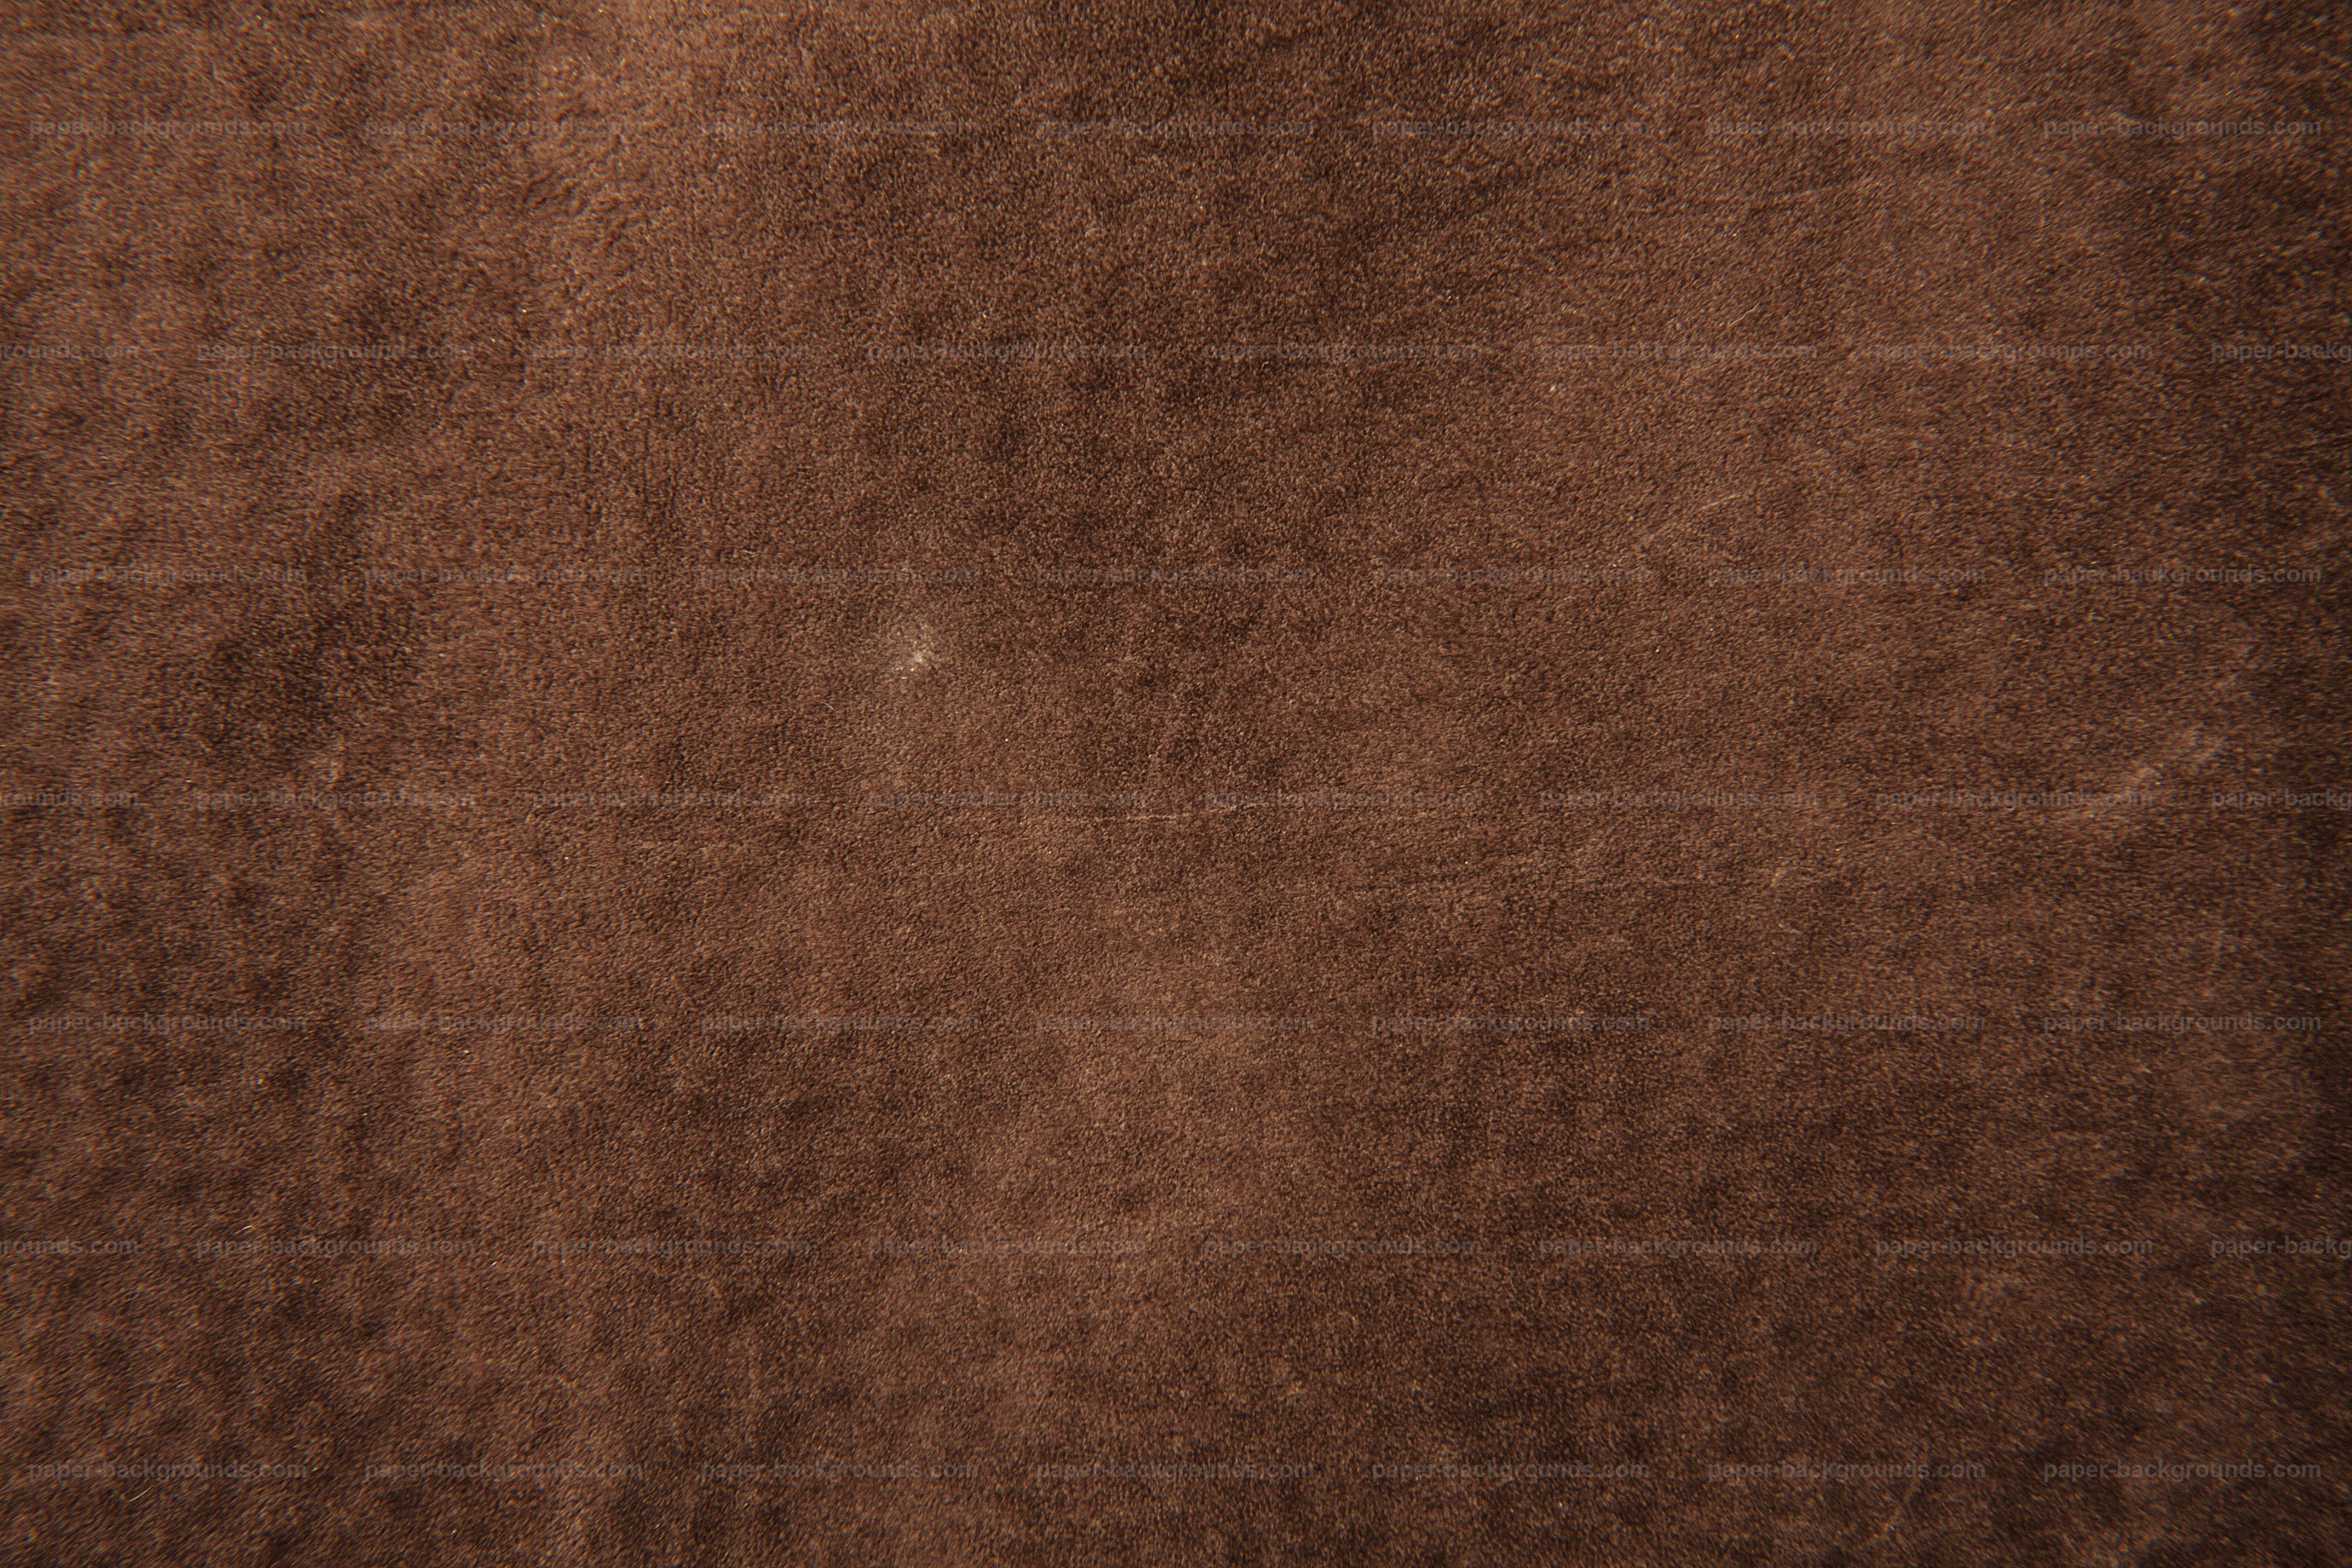 Paper Backgrounds | Vintage Brown Soft Leather Texture Background ...